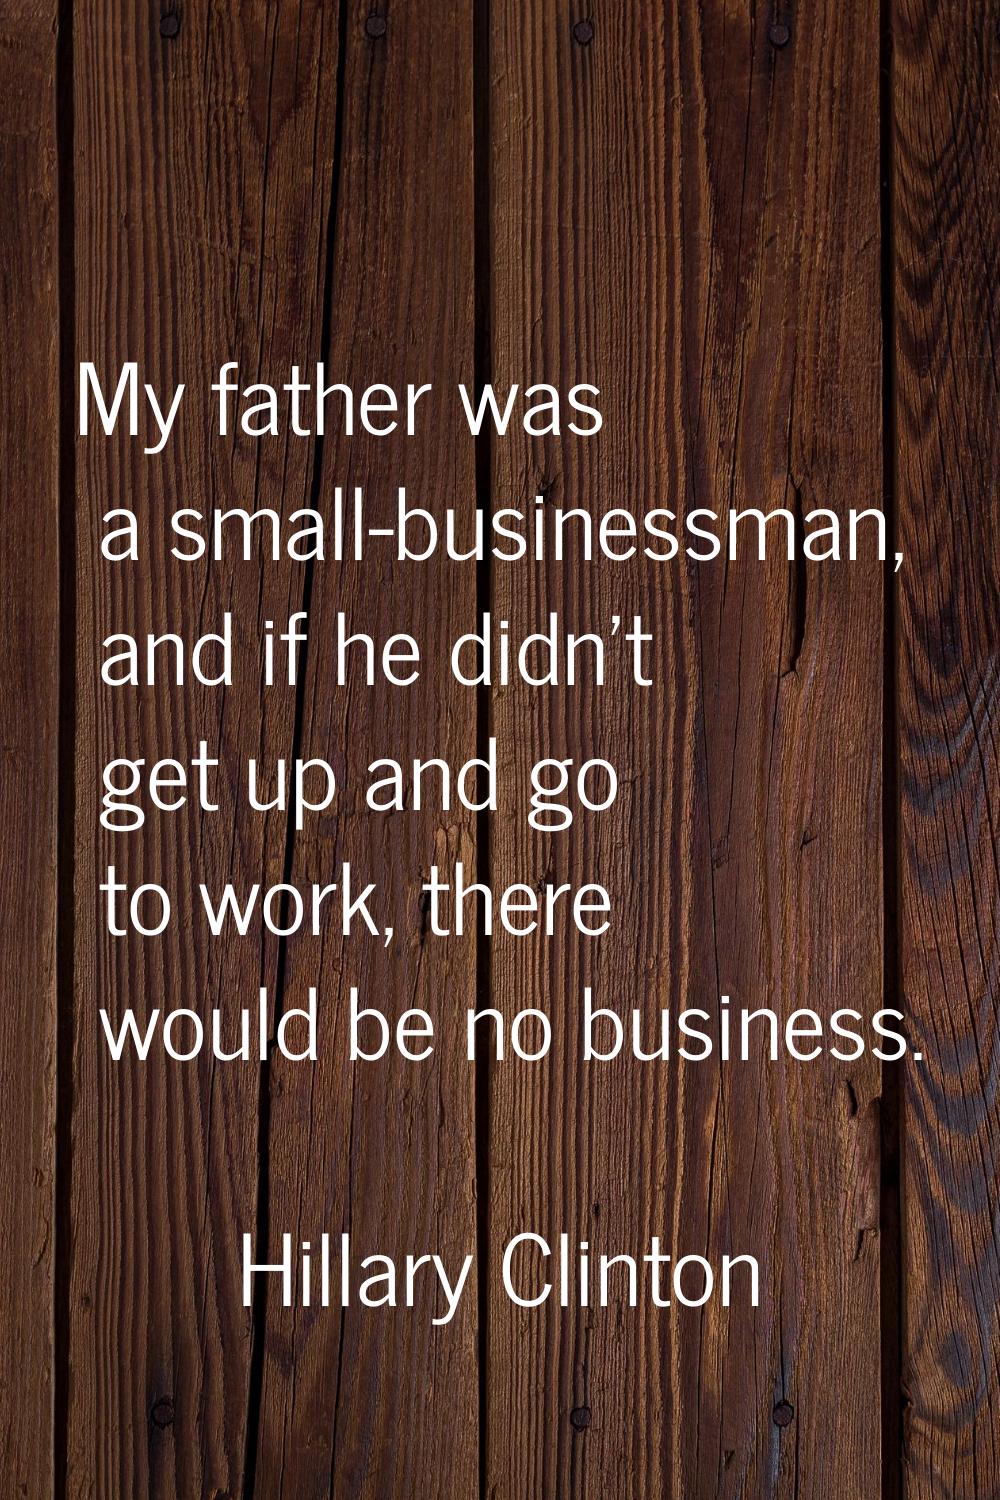 My father was a small-businessman, and if he didn't get up and go to work, there would be no busine